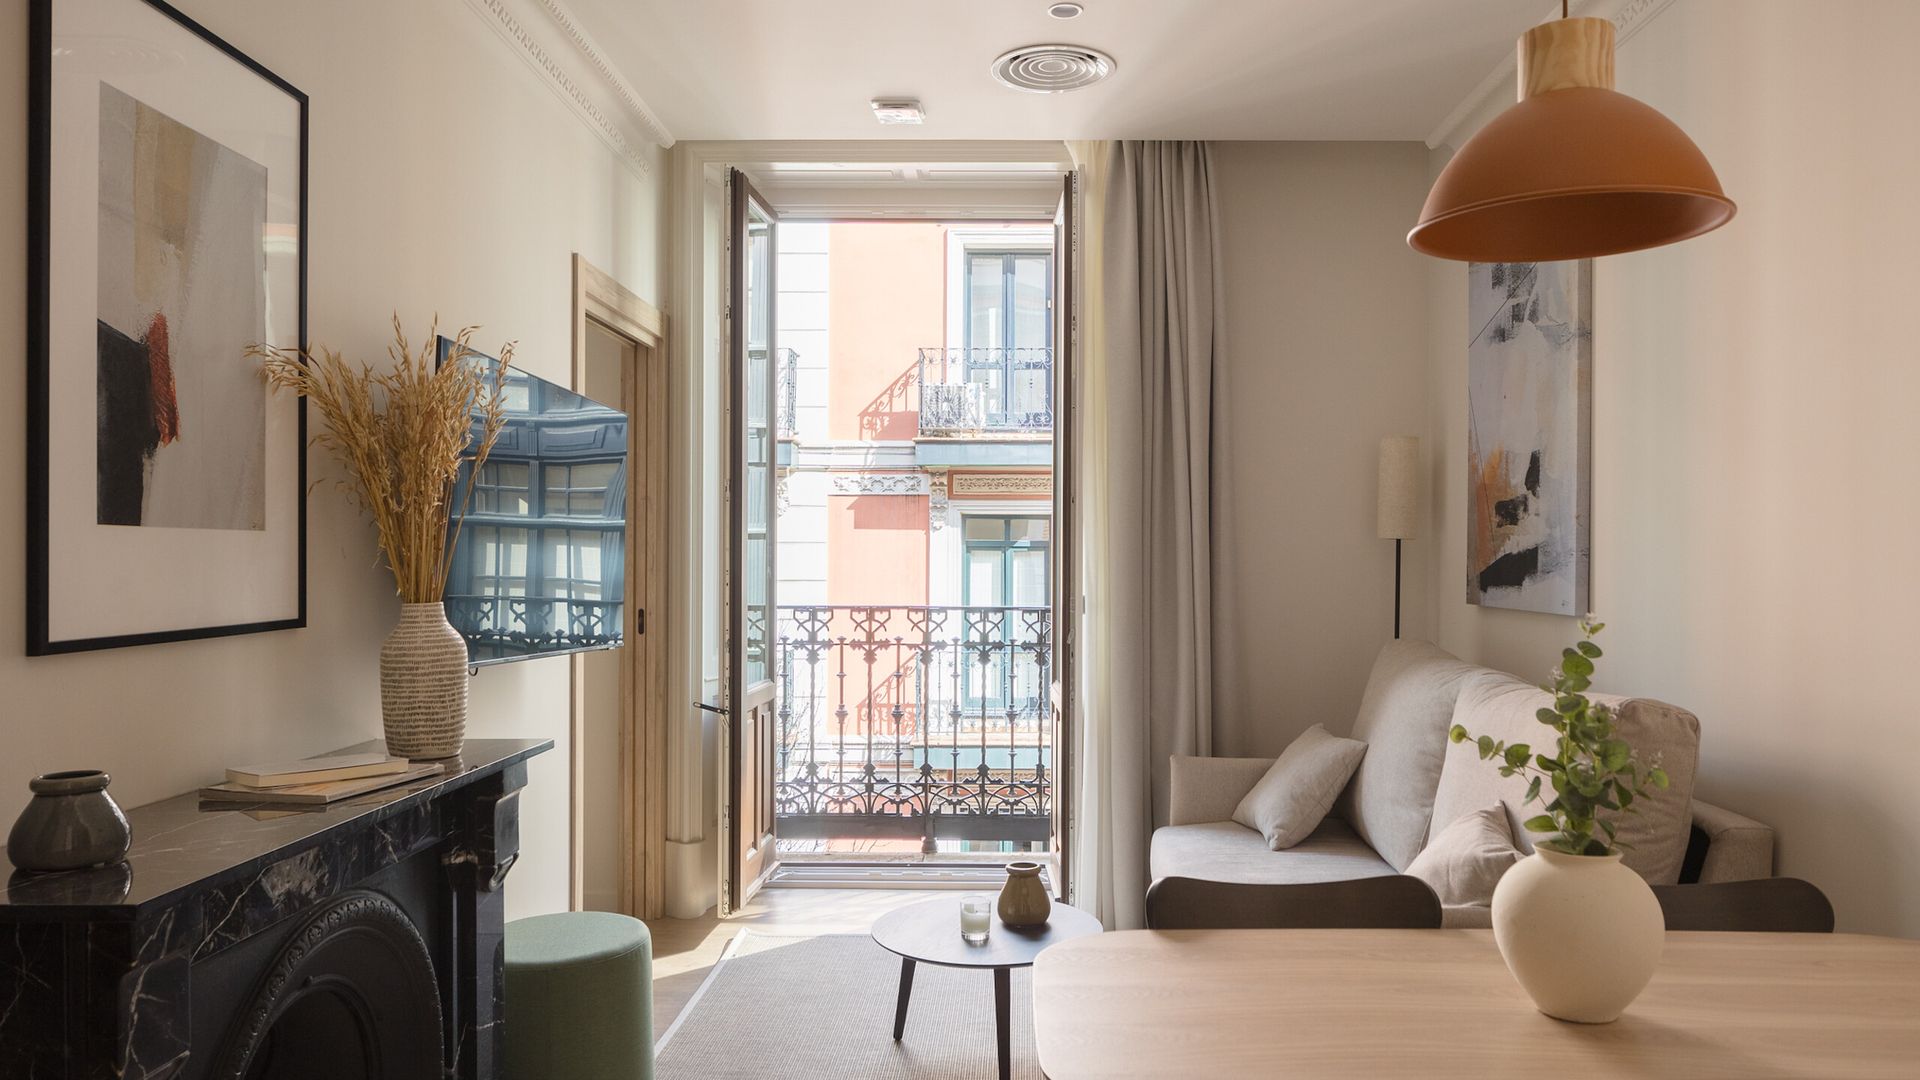 1 bedroom apartment with a balcony in Bilbao Ledesma